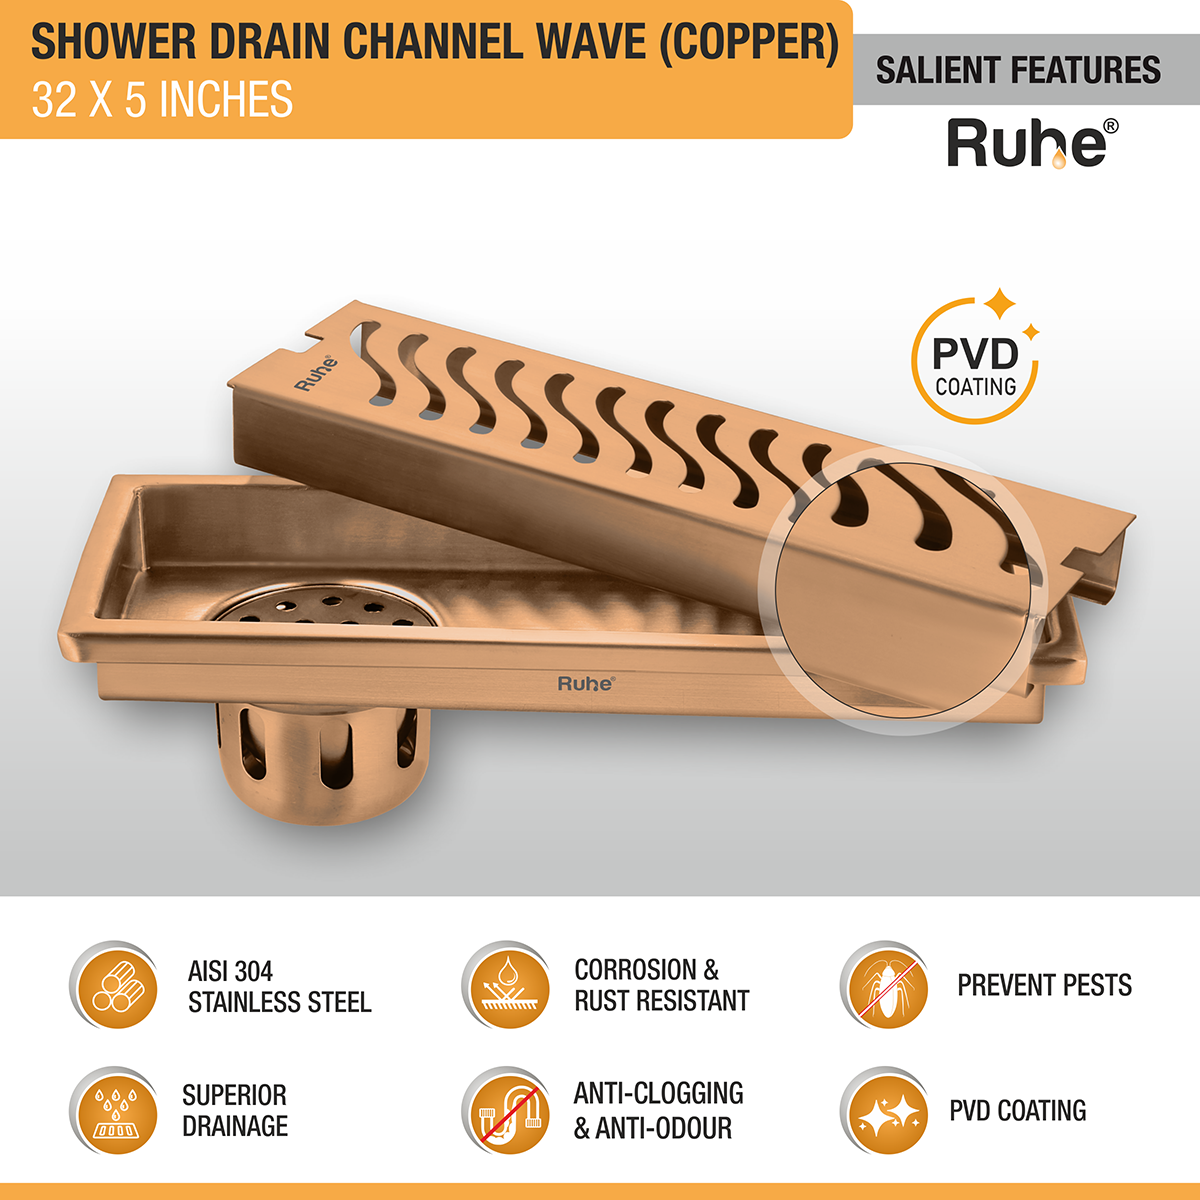 Wave Shower Drain Channel (32 x 5 Inches) ROSE GOLD/ANTIQUE COPPER features